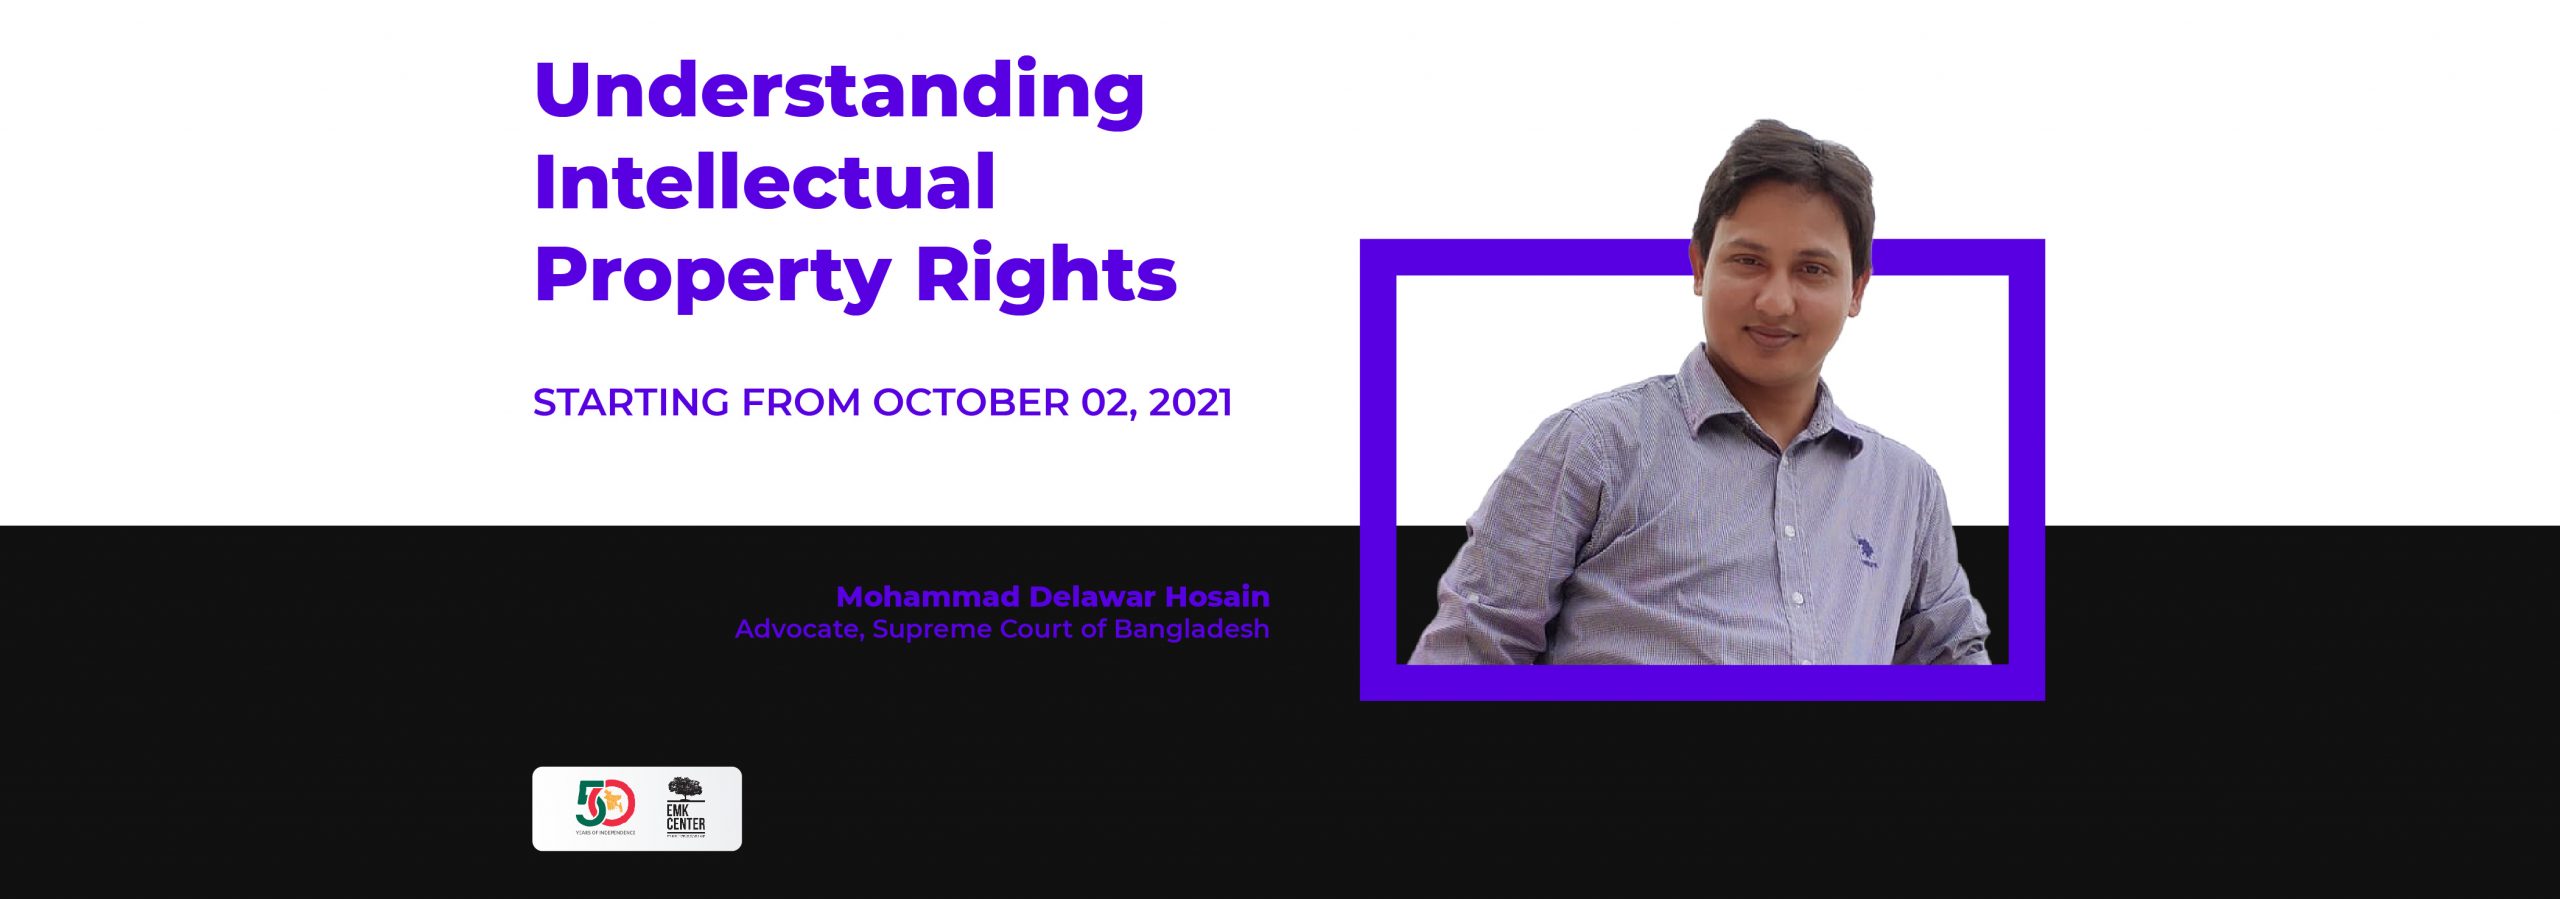 Virtual Workshop on Understanding Intellectual Property Rights